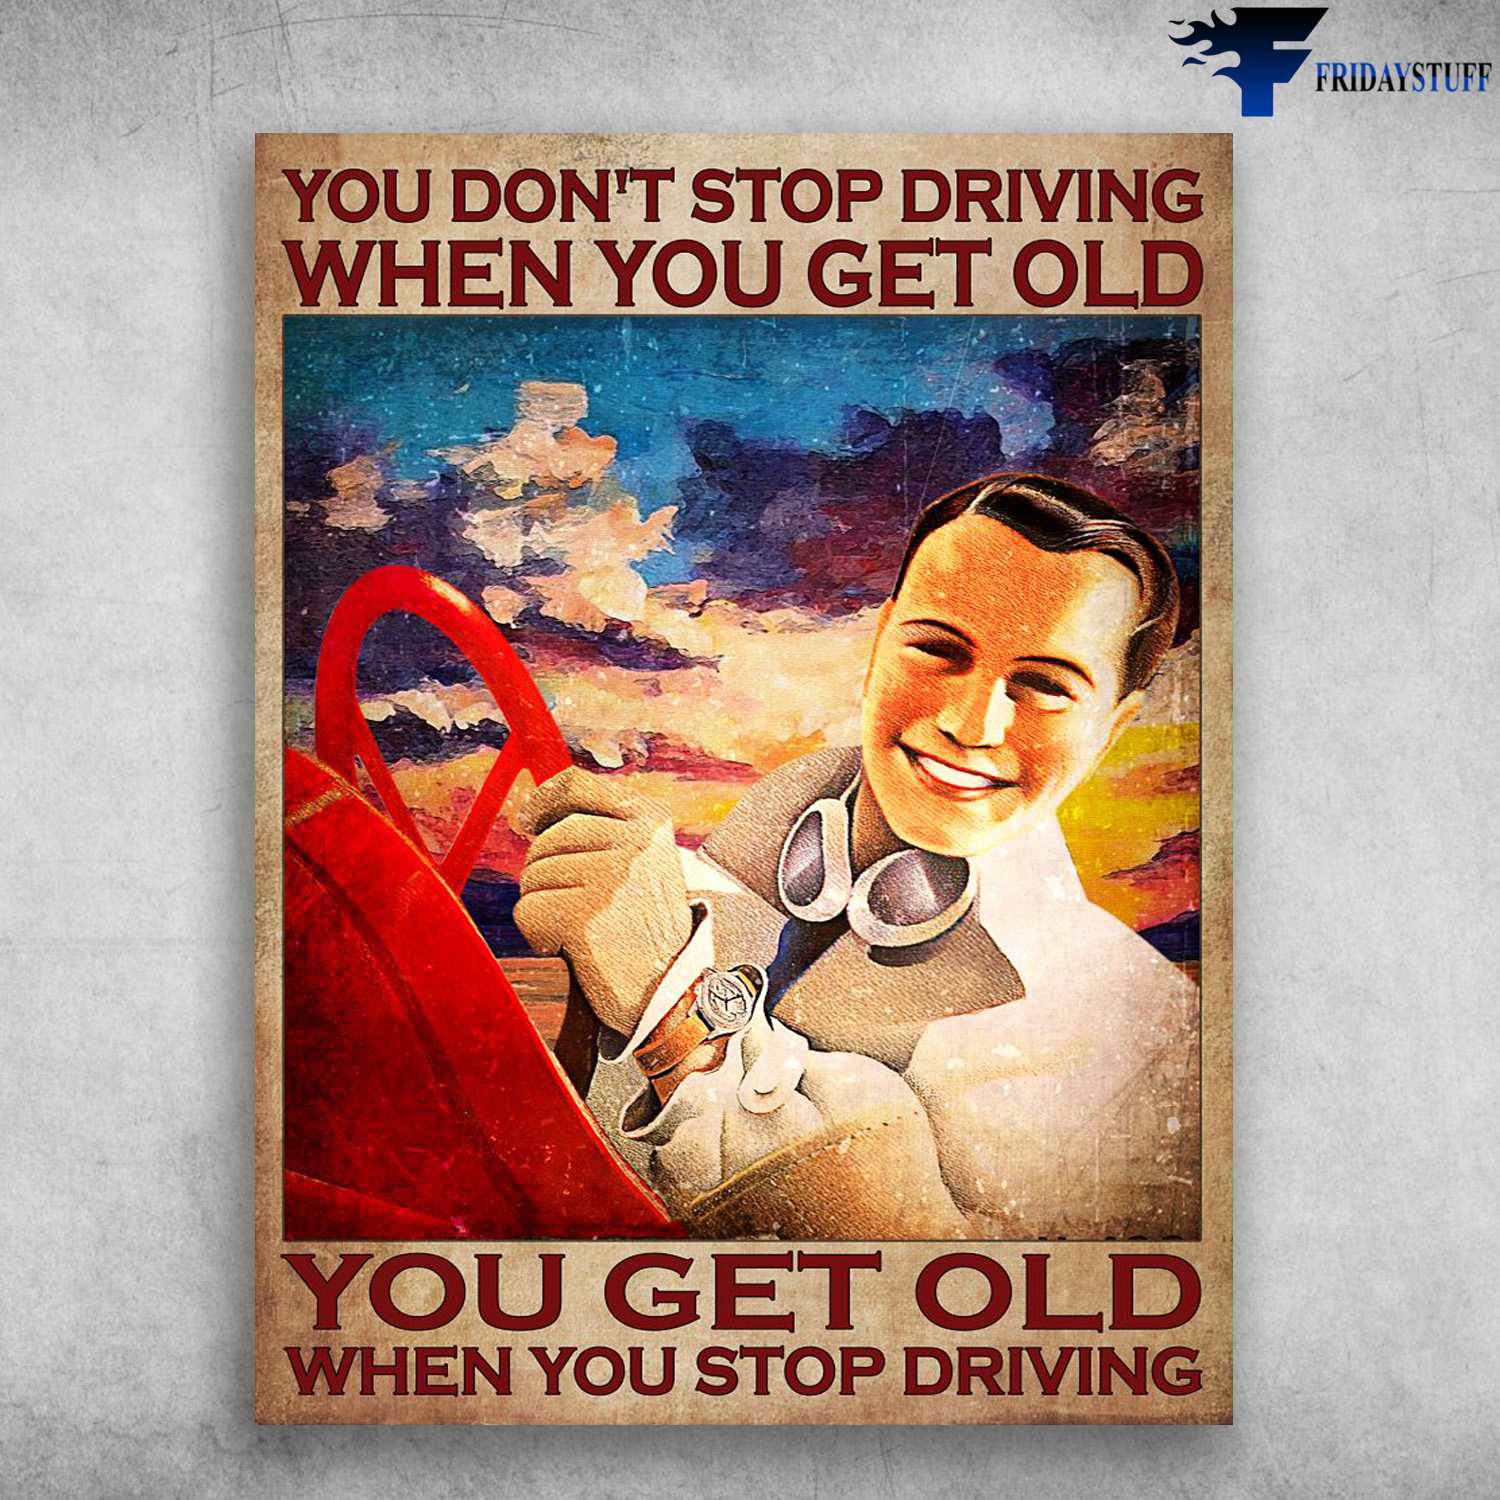 Car Driving - You Don't Stop Driving When You Get Old, You Get Old When You Stop Driving